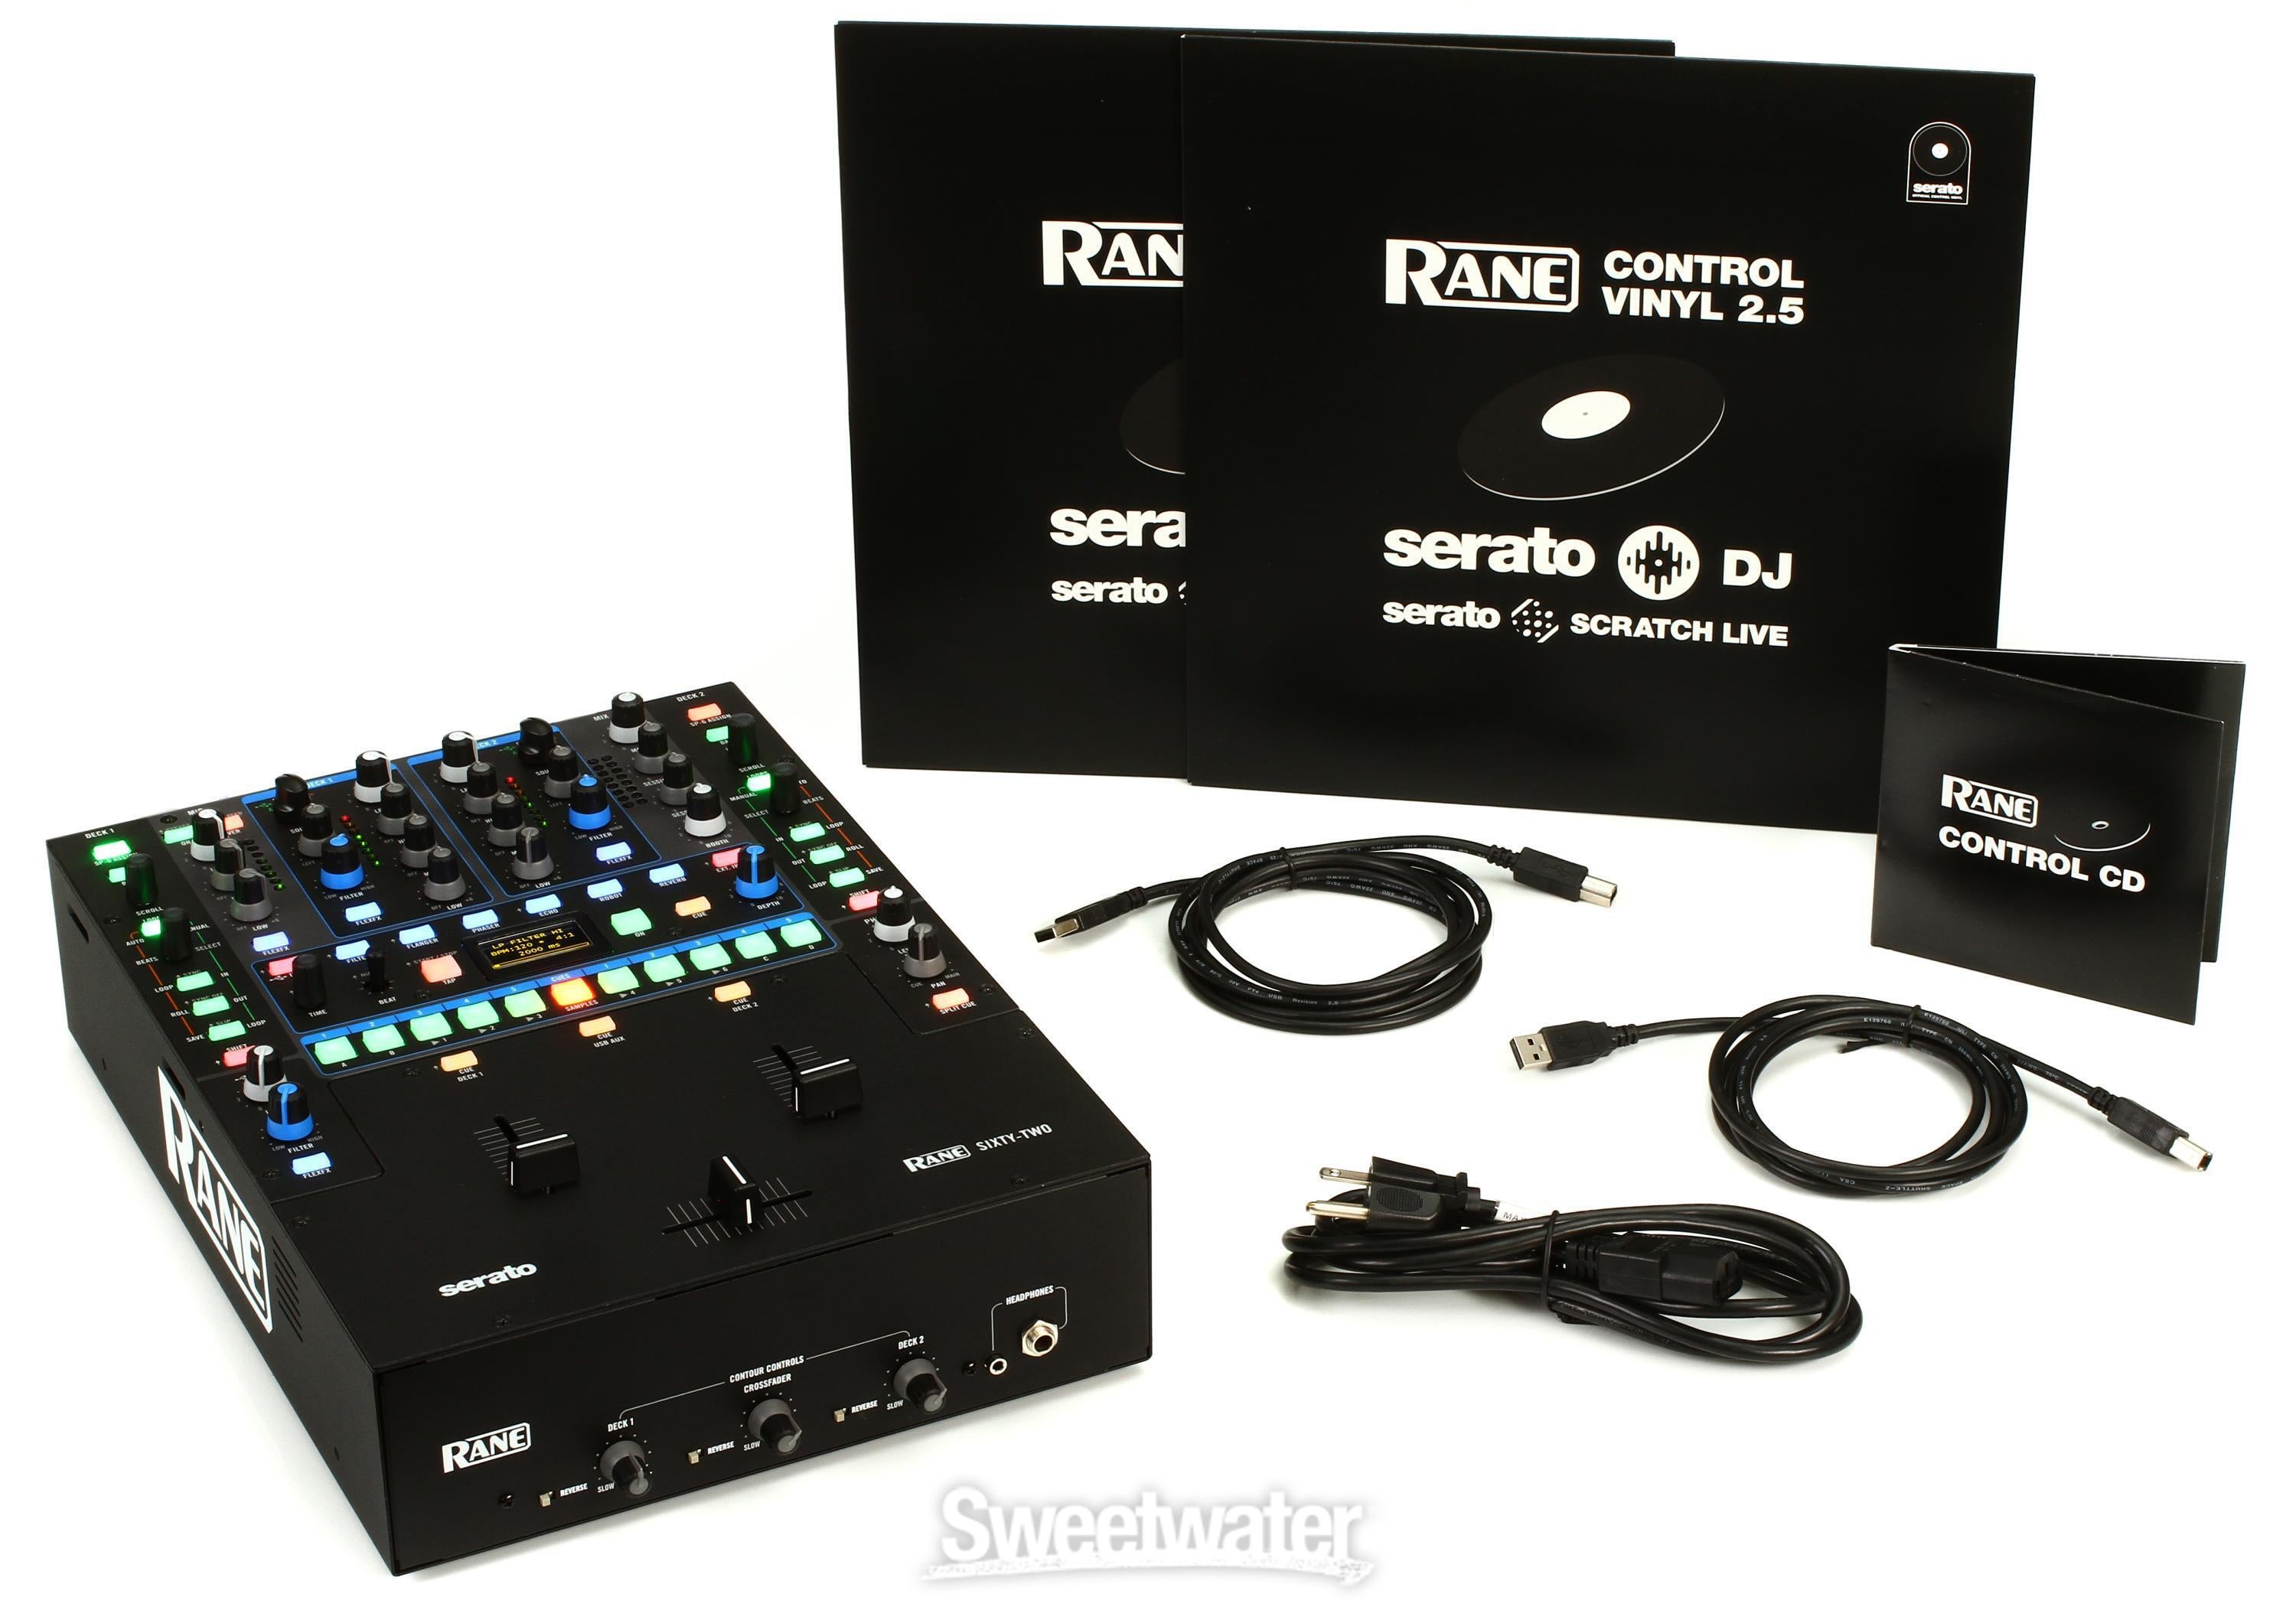 Rane Sixty-Two Mixer with Serato DJ | Sweetwater